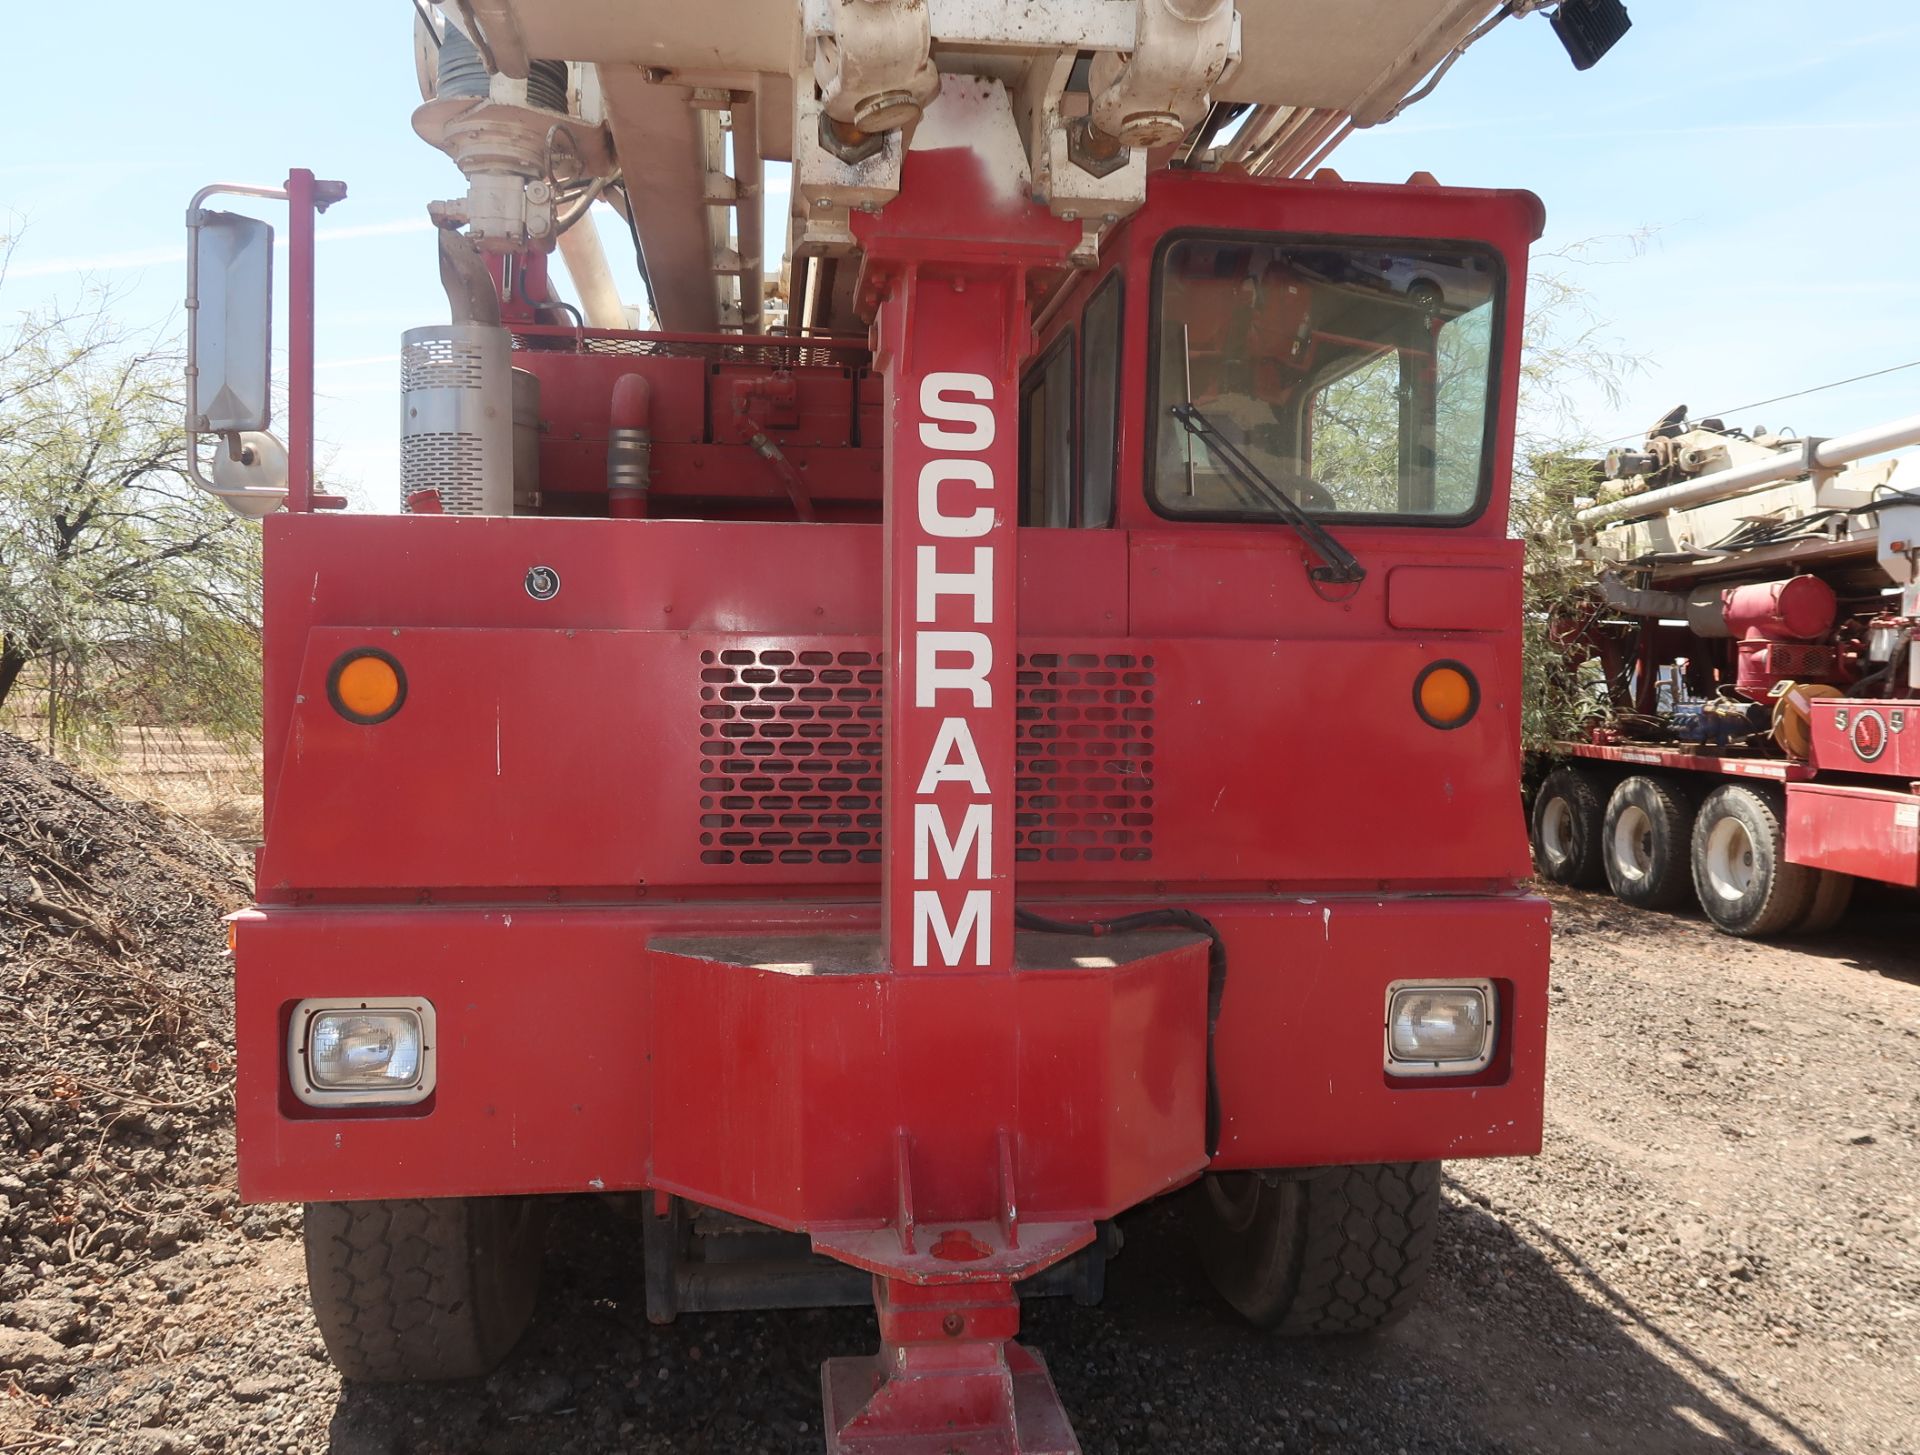 2006 SCHRAMM T-130XD DRILL RIG, SN. J130-0135 MOUNTED ON CRANE CARRIER, VIN. 1CYDGV6846T046987 - Image 15 of 18